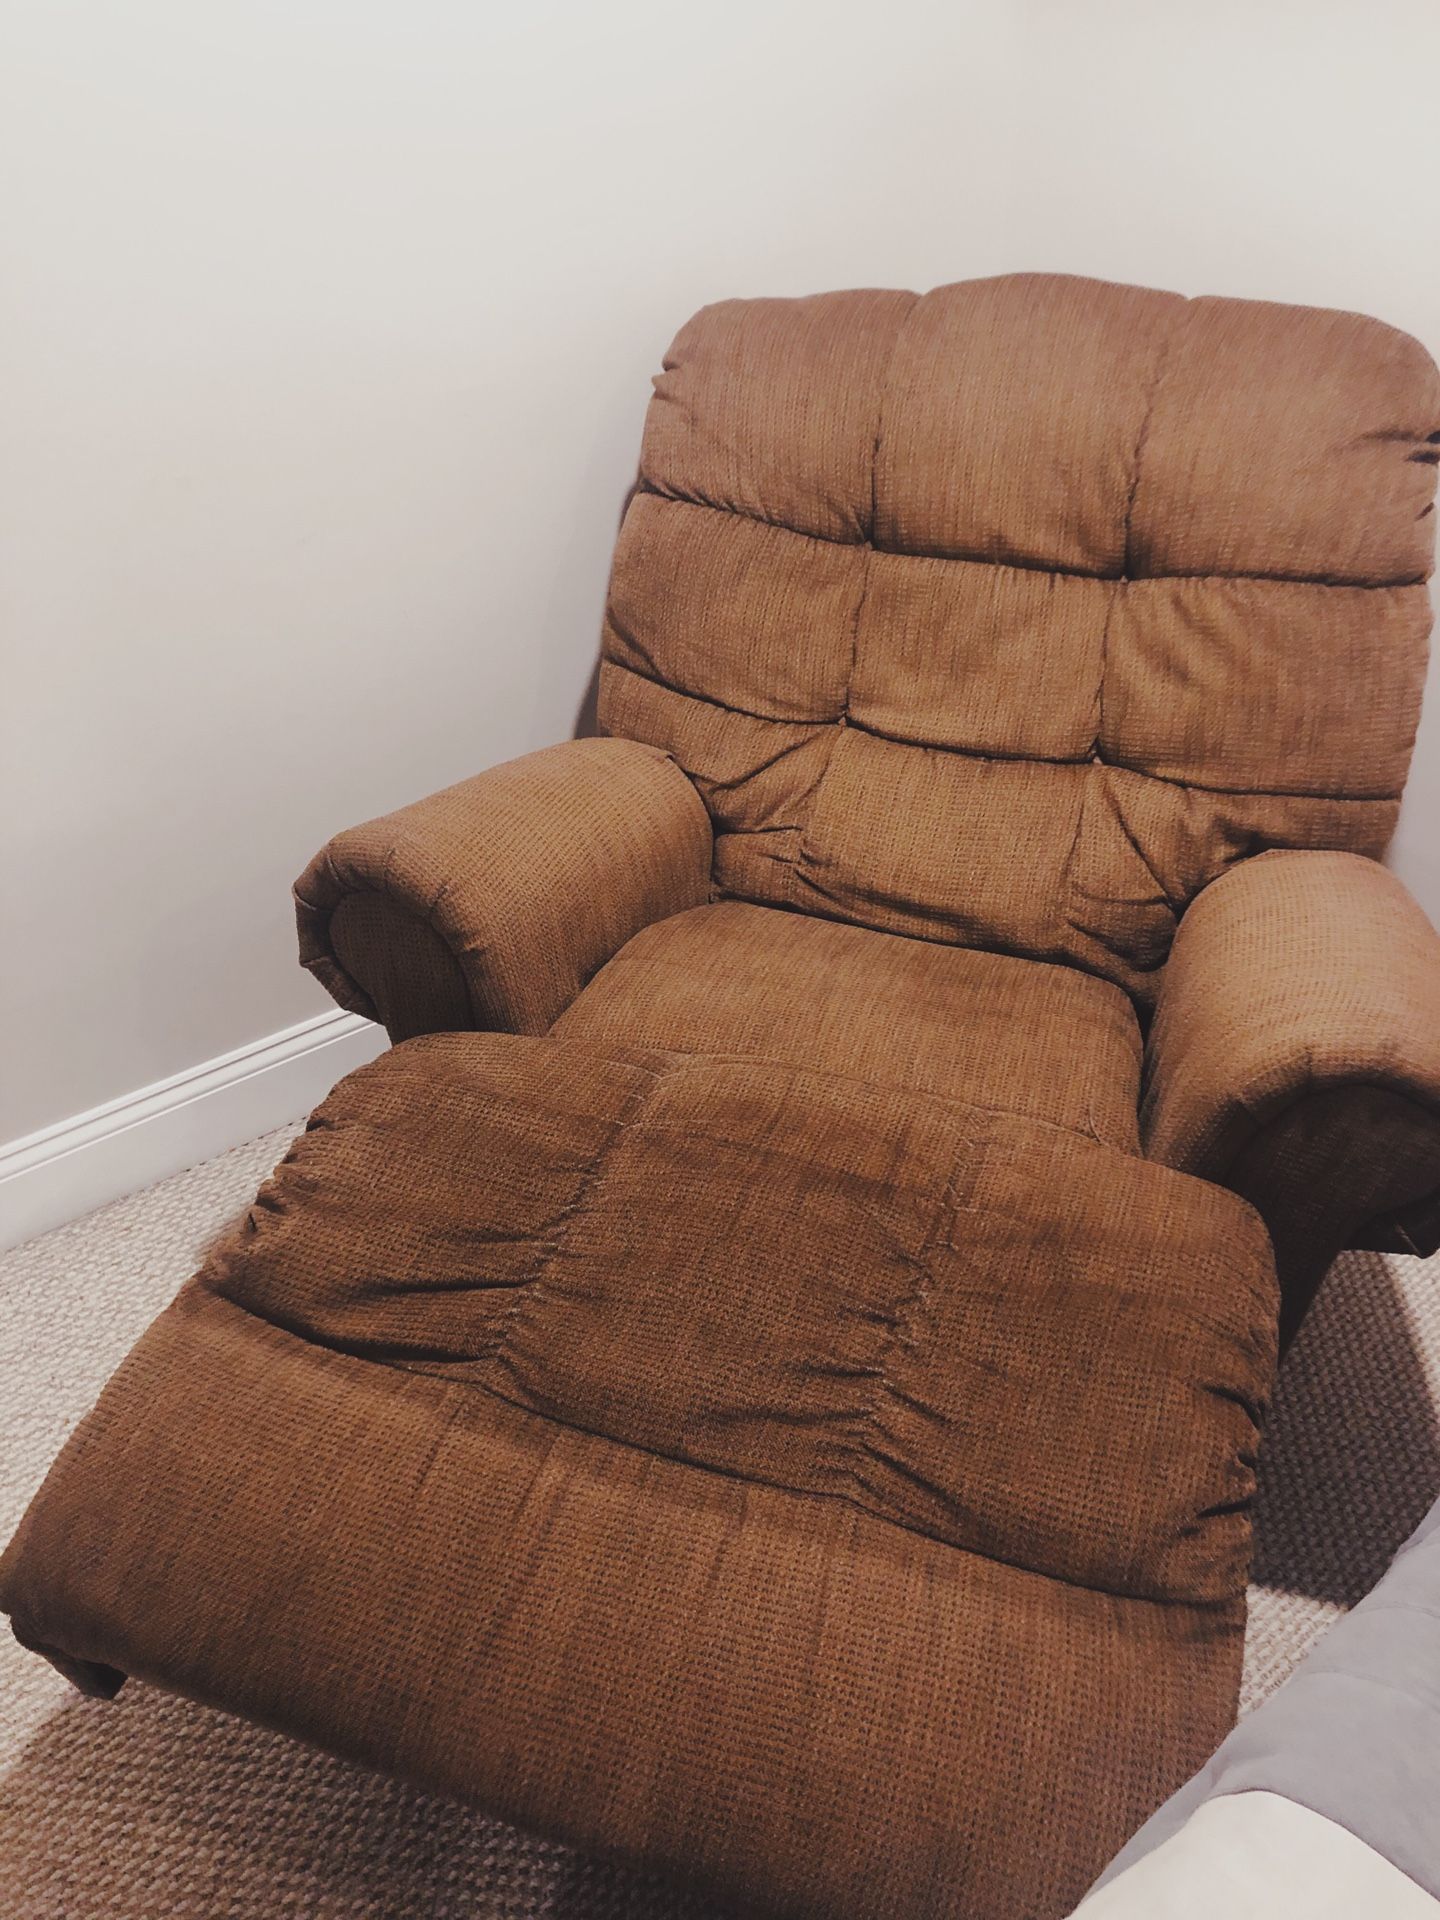 Couch / Sofa with matching recliner chair